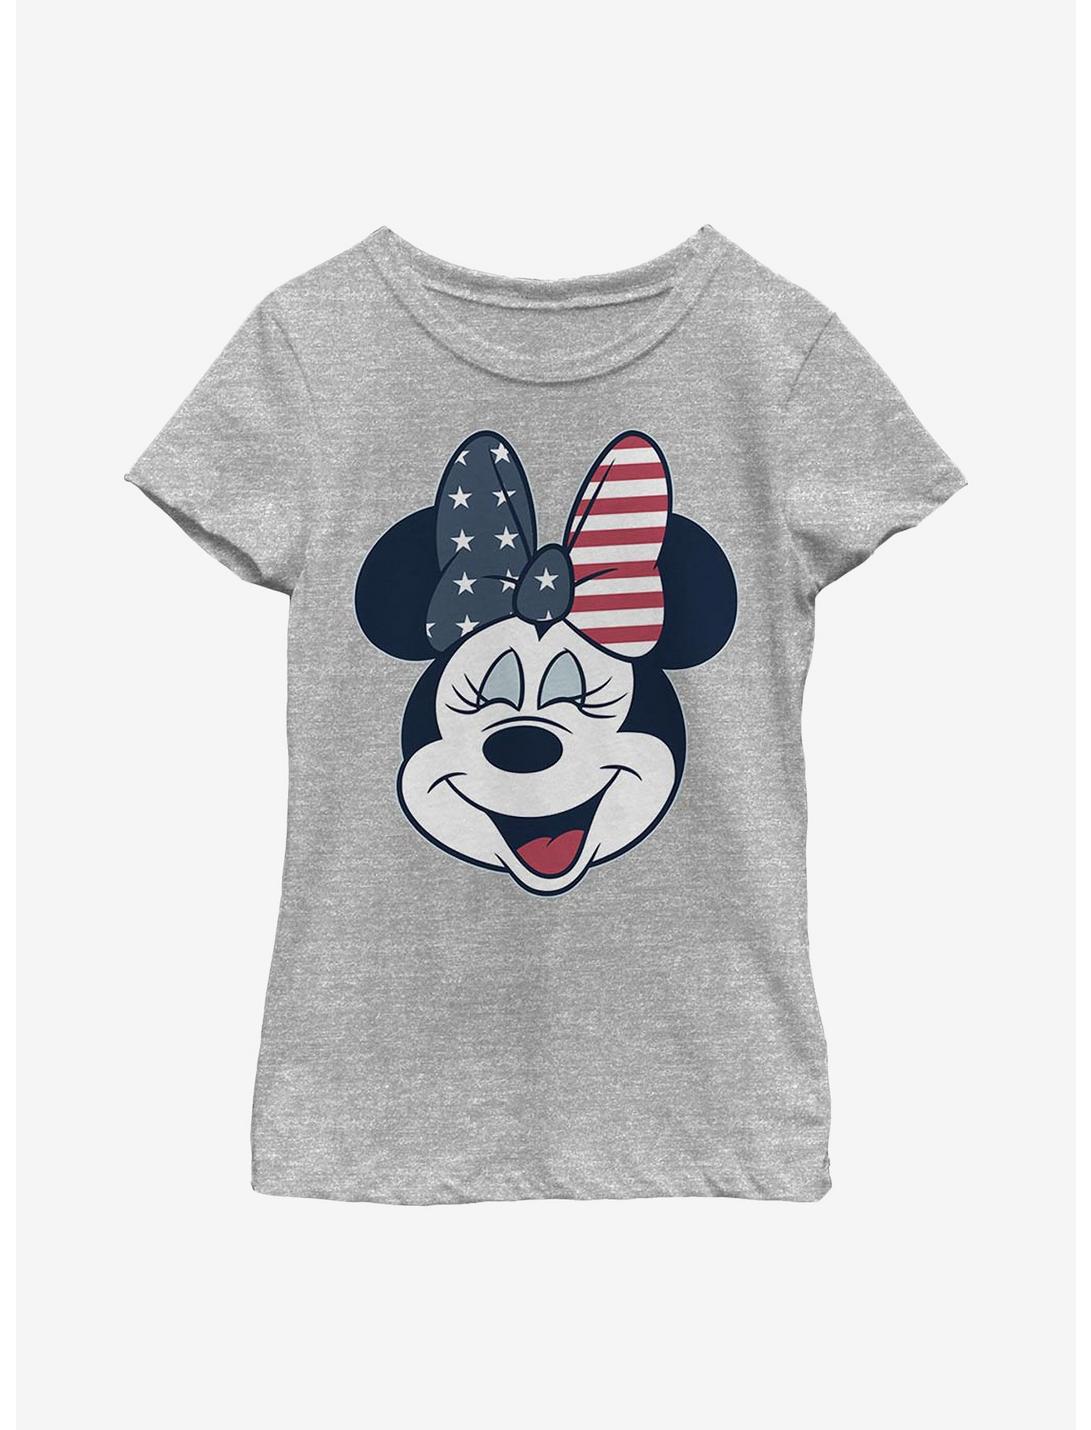 Disney Minnie Mouse American Bow Youth Girls T-Shirt, ATH HTR, hi-res